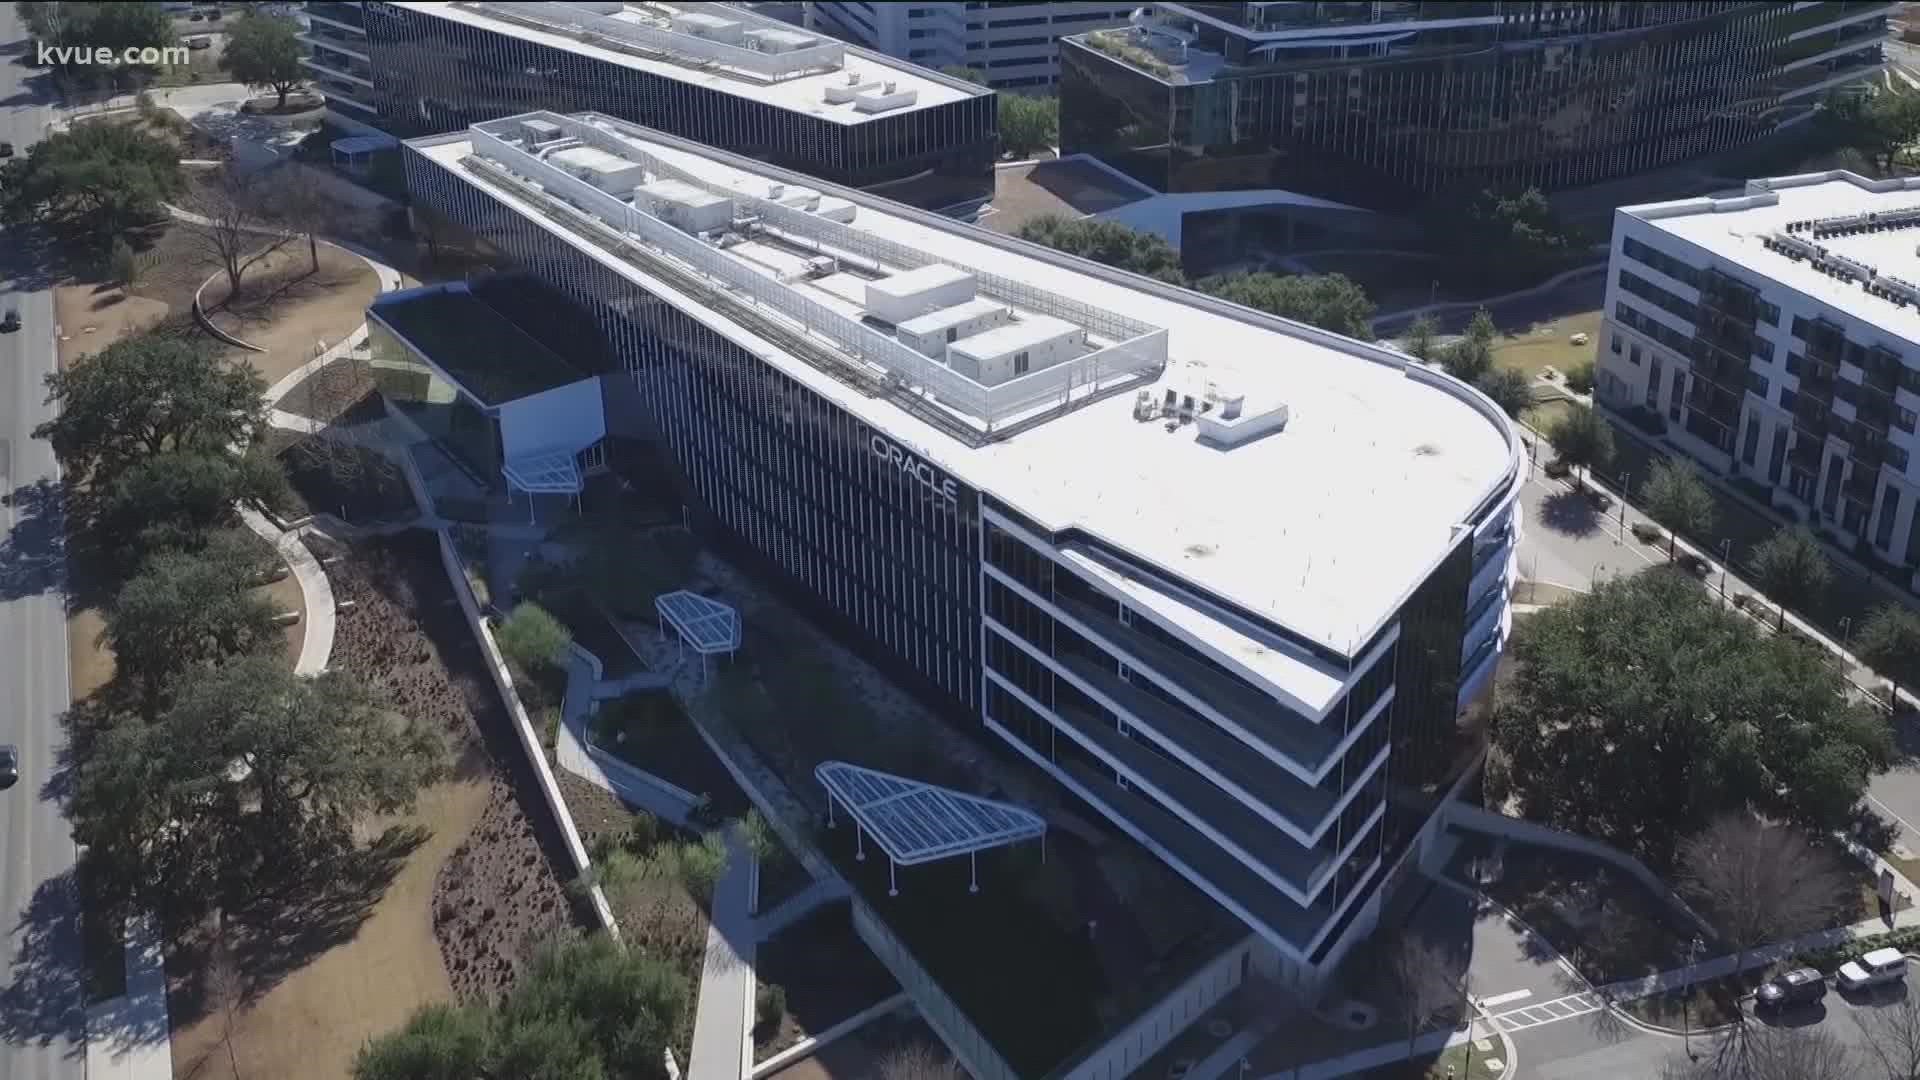 Oracle could end up adding nine more acres to their headquarters in Austin.